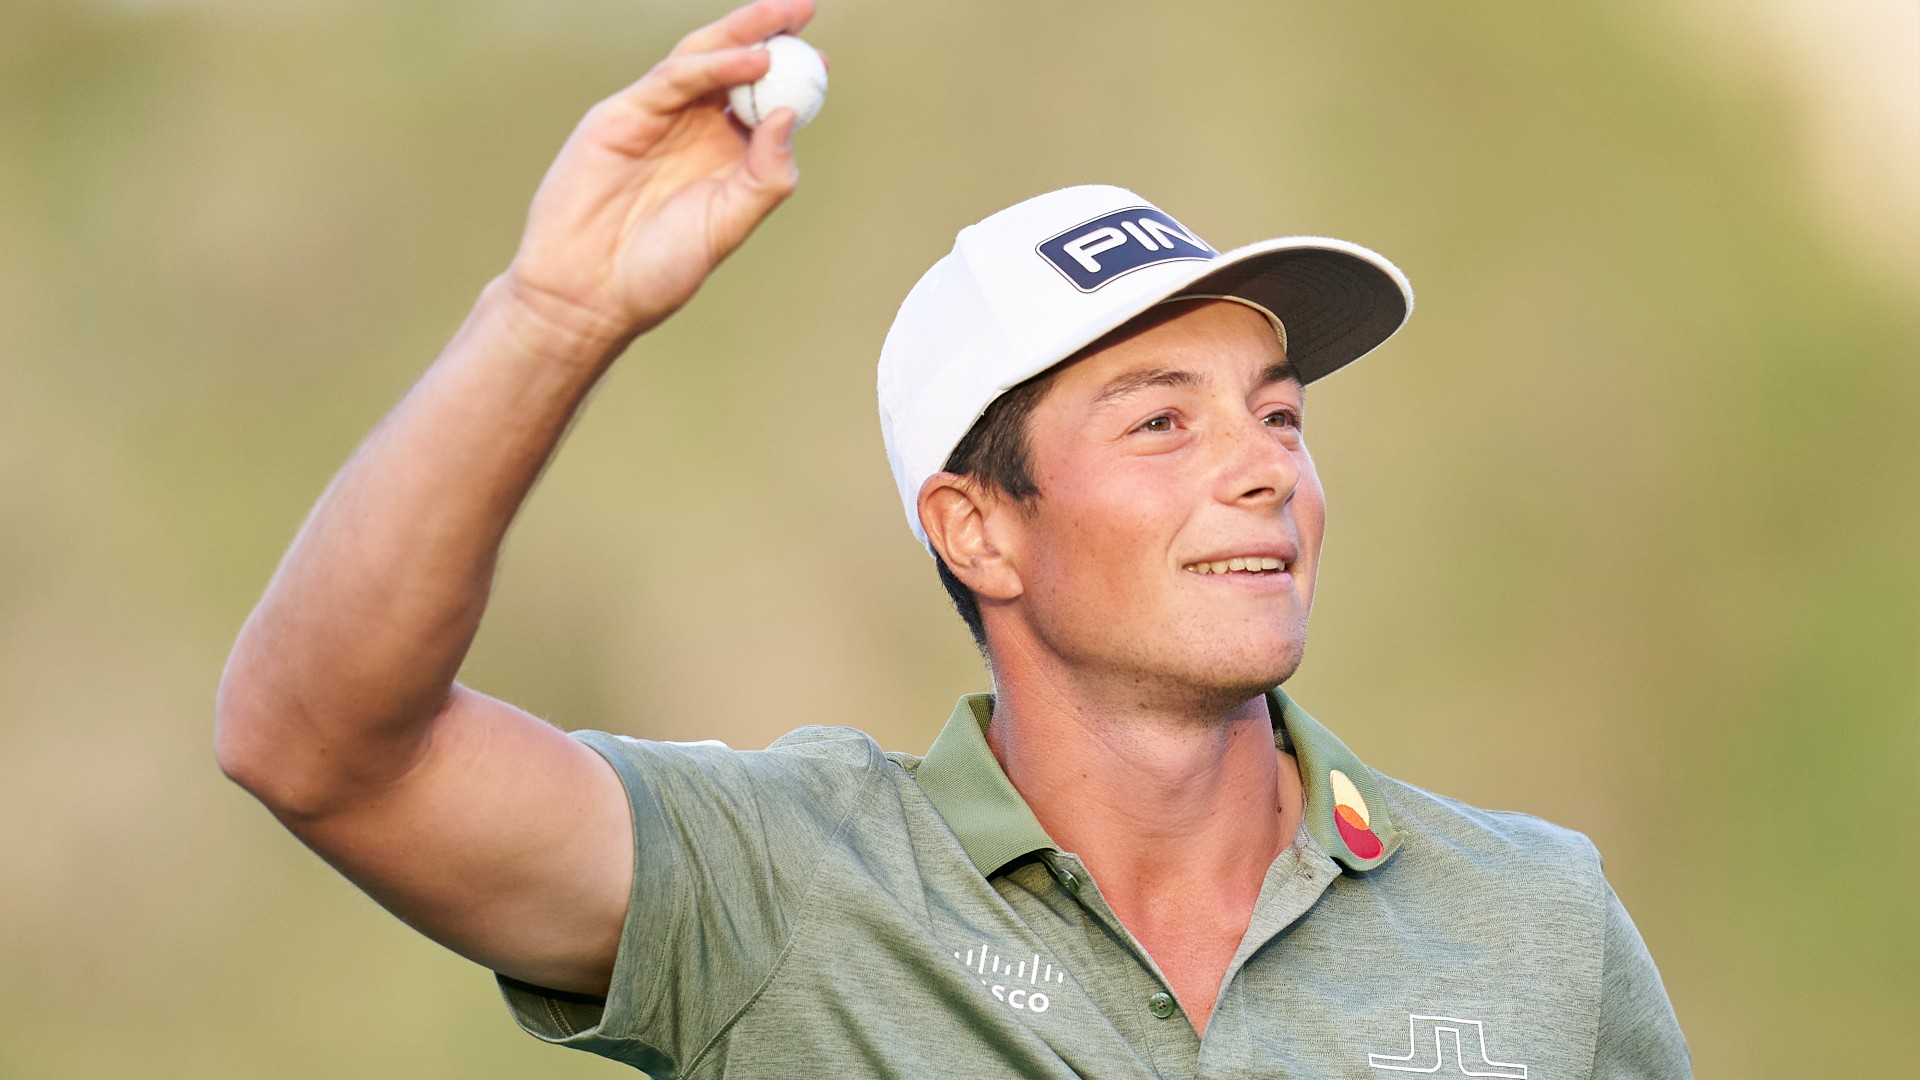 2022 Arnold Palmer Invitational Odds & Picks: Viktor Hovland, Paul Casey, Danny Willett Are Strong Course Fits